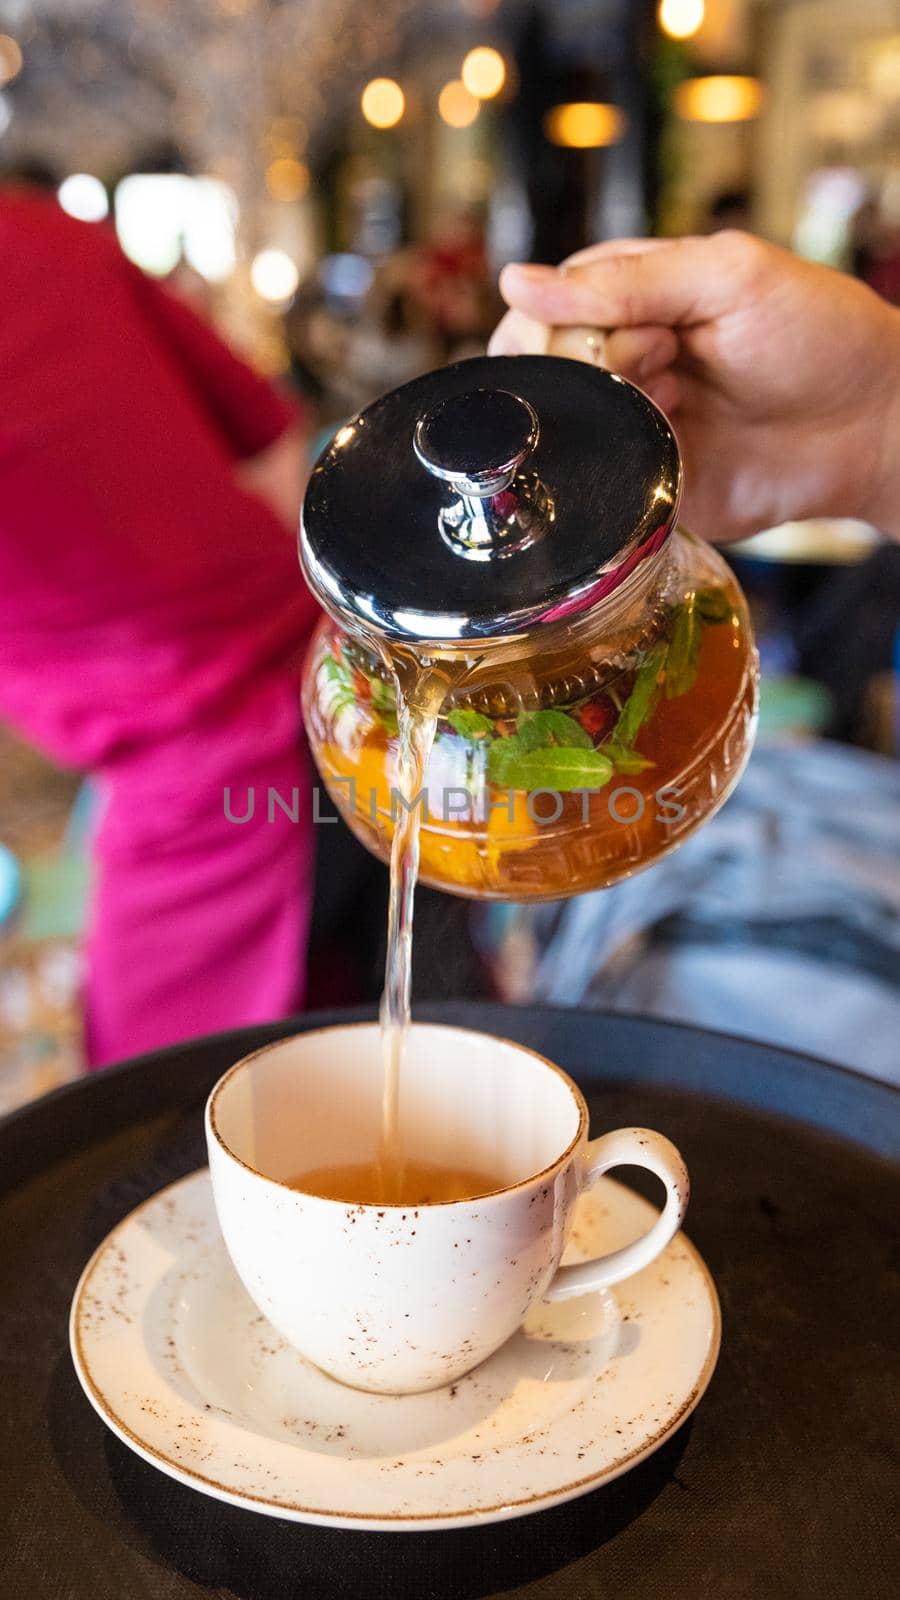 Pouring yellow natural tea to the cup by ferhad